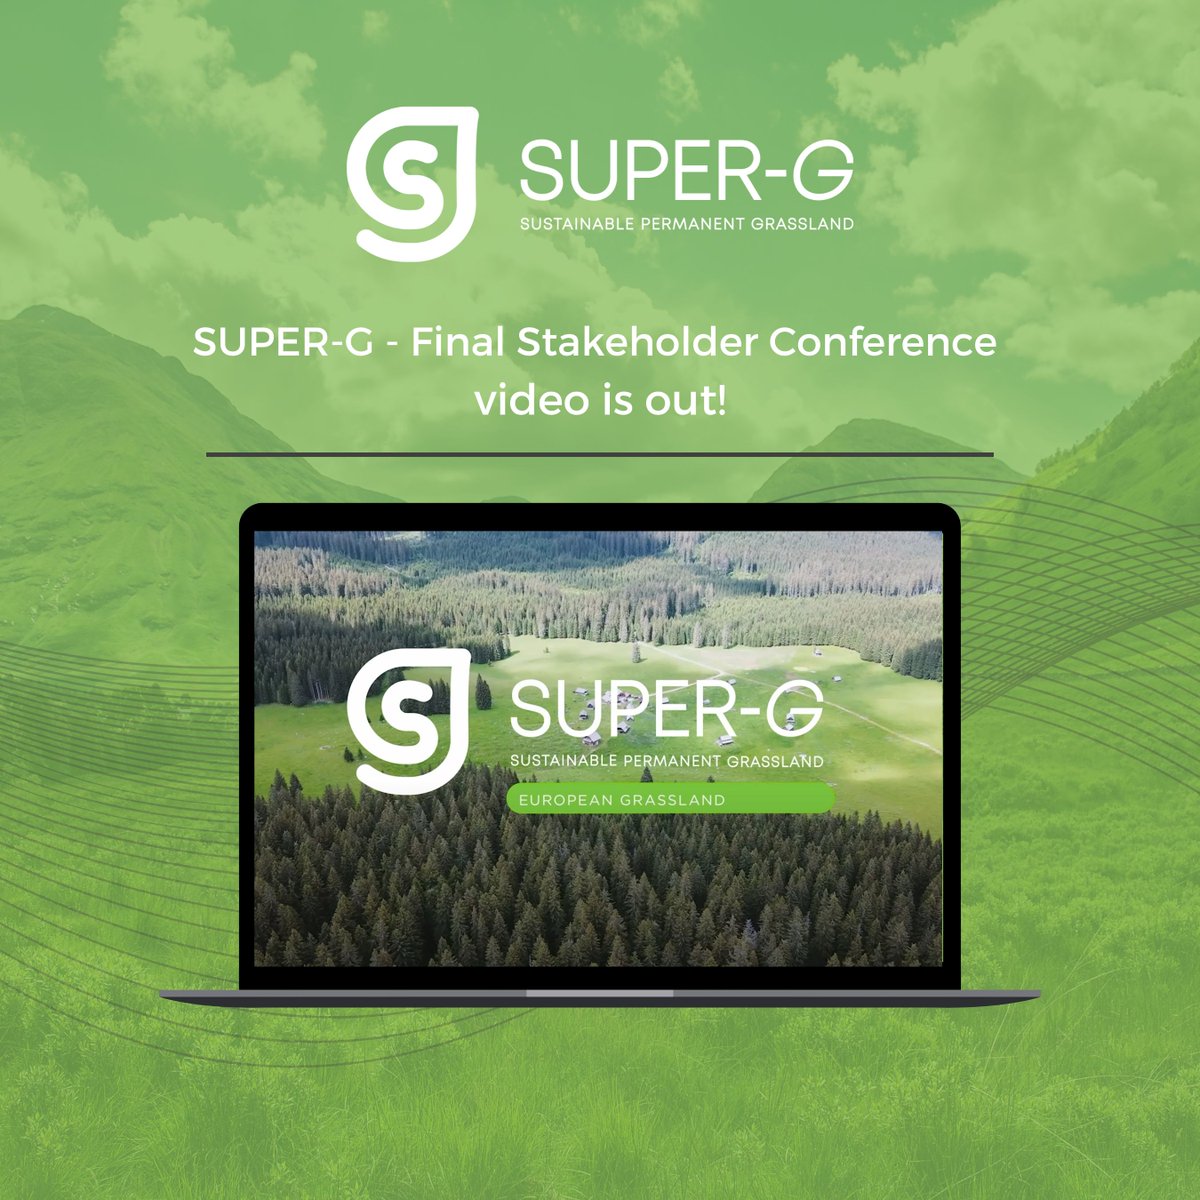 🎉 Exciting news! 📽️ Join us for the grand finale of SUPER-G and witness the launch of our Final Stakeholder Conference video! 👉Click on the link to watch it: youtube.com/watch?v=BOWmYJ…